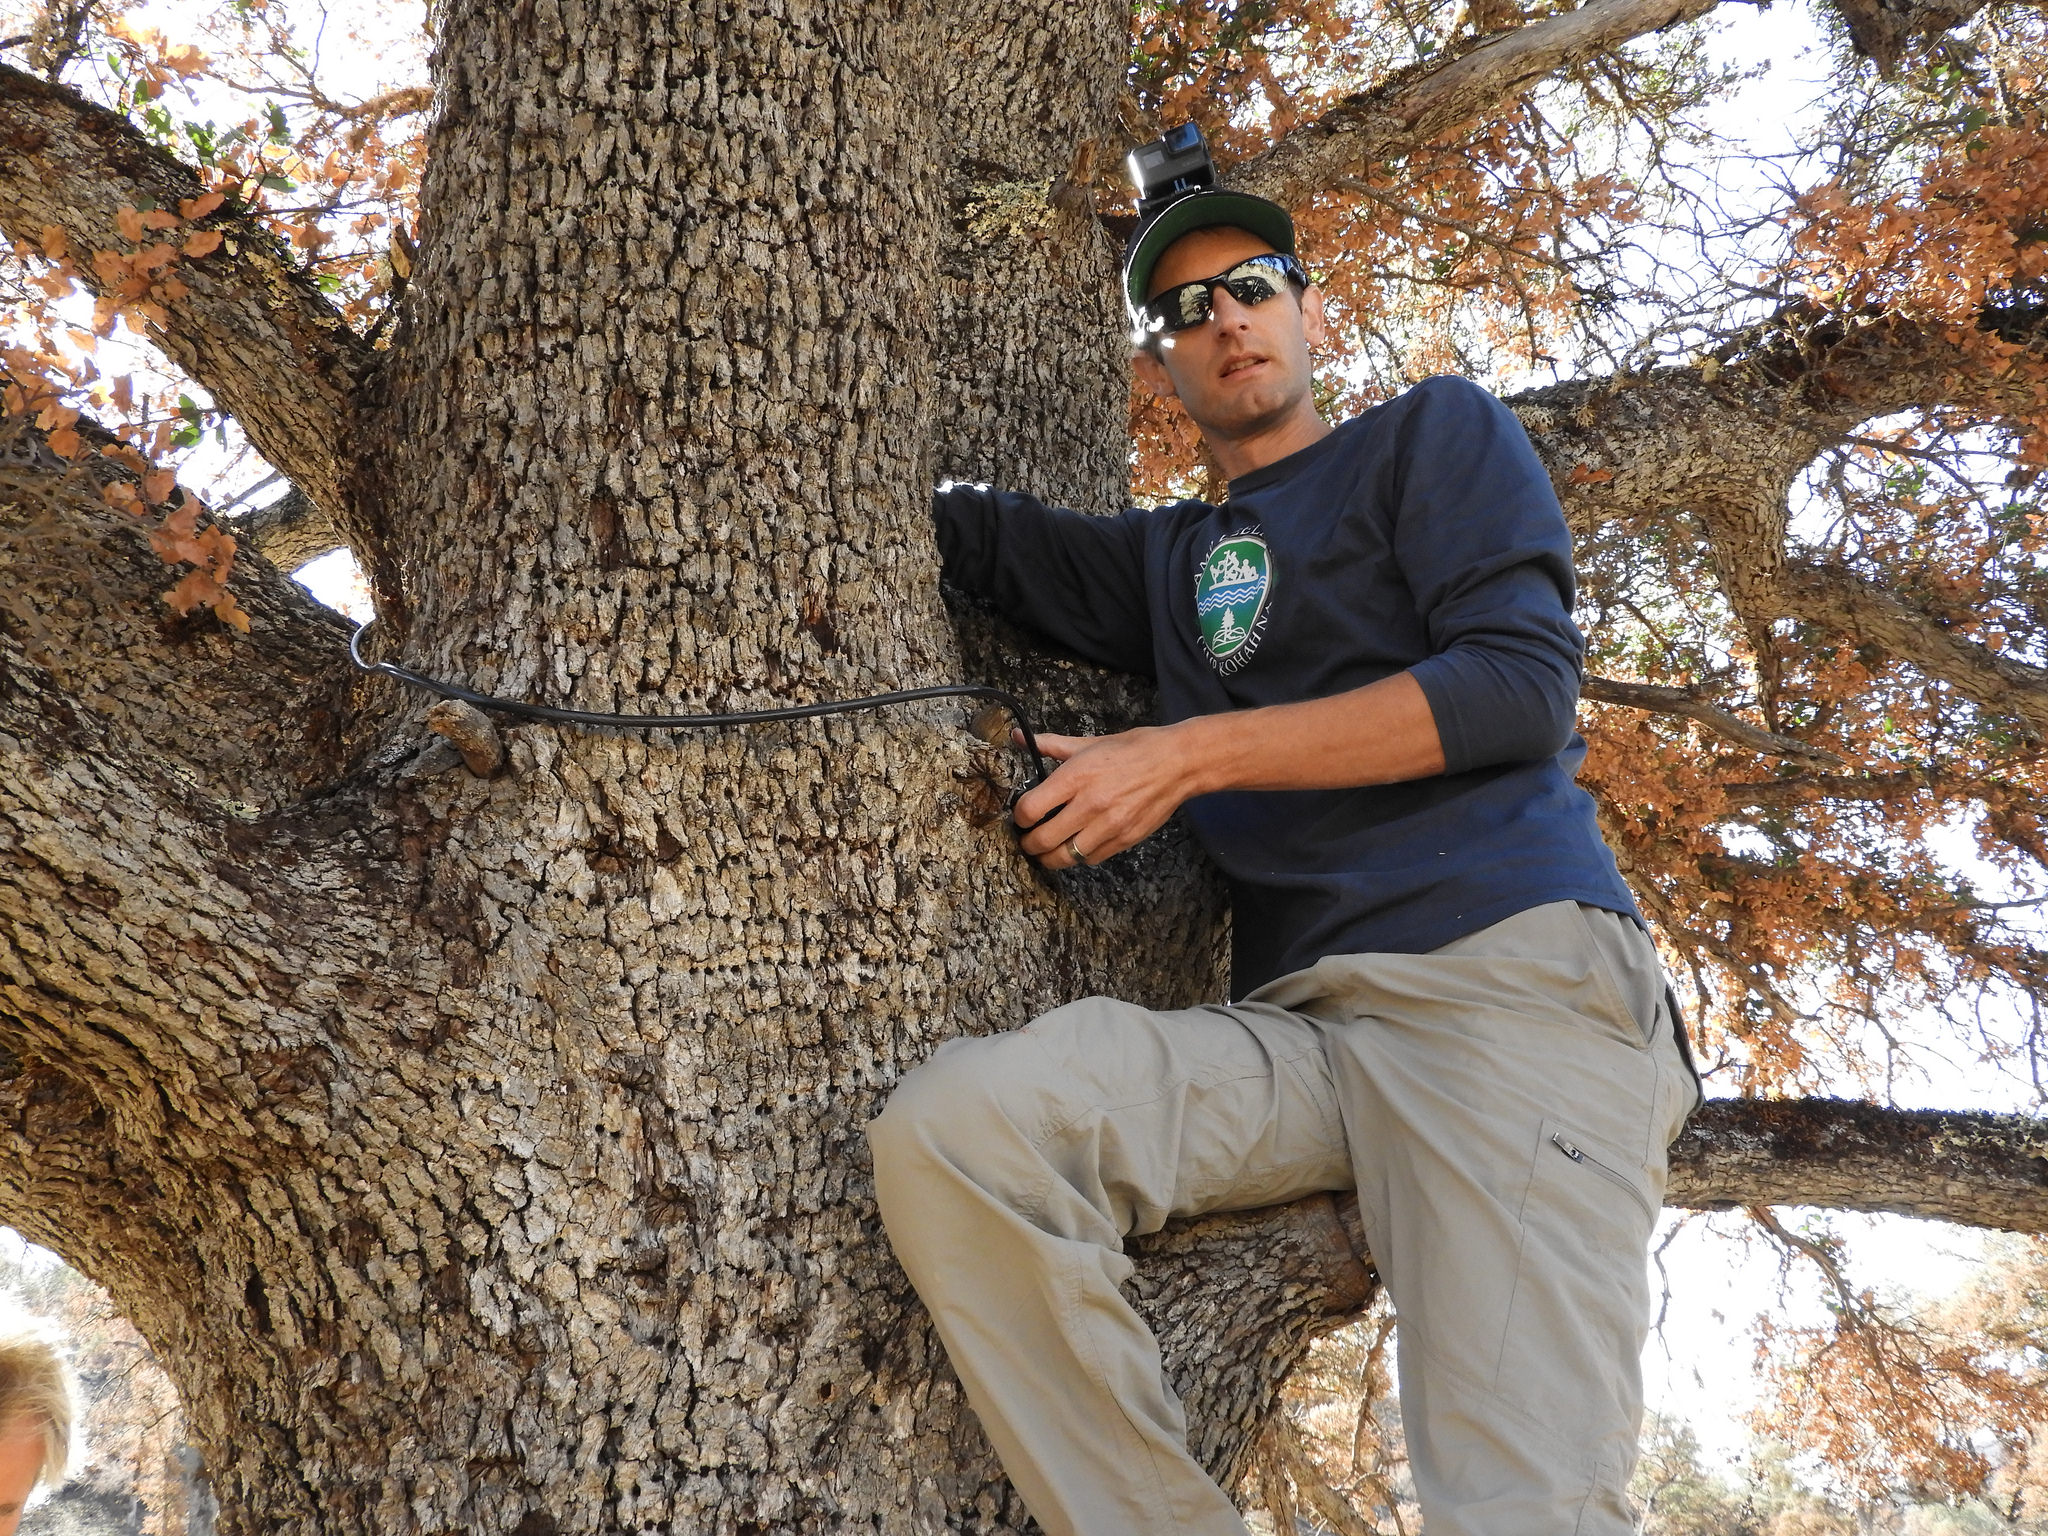 Tuleyome staffer Nate Lillge places one of te trail cameras. [Photo by Mary K. Hanson]